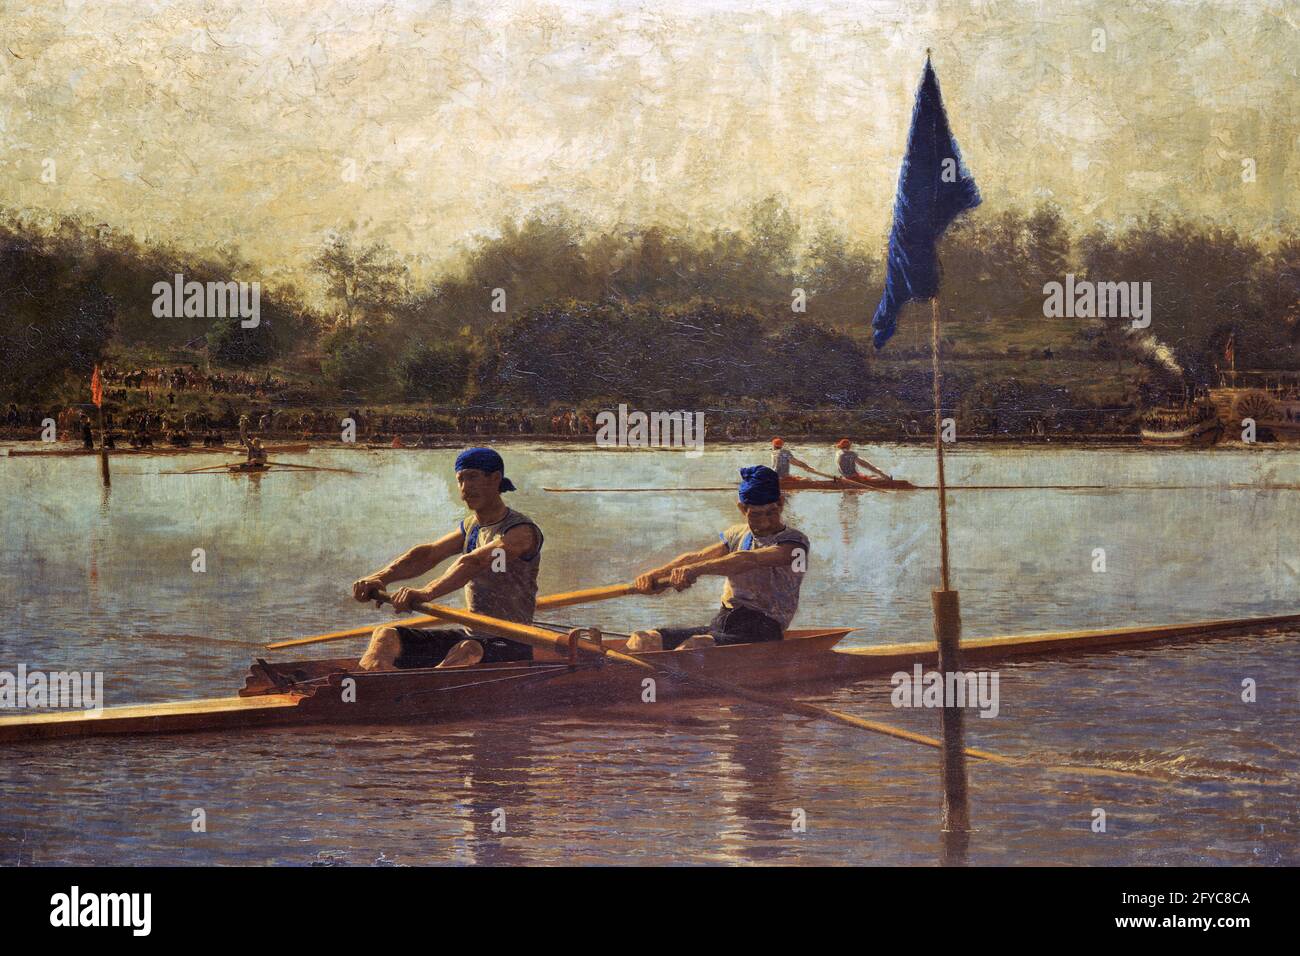 1870s 1873 THE BIGLIN BROTHERS TURNING THE STAKE SWEEP ROWING RACE ON SCHUYKILL RIVER BY THOMAS EAKINS PHILADELPHIA PA USA  - ka9274 SPL001 HARS HALF-LENGTH PHYSICAL FITNESS PERSONS SHELL MALES ATHLETIC SIBLINGS 1800s TURNING GOALS ACTIVITY PHYSICAL STRENGTH SCULLING RECREATION SIBLING SWEEPER EAKINS 1870s ATHLETES FLEXIBILITY MUSCLES STAKE COOPERATION SCULL TOGETHERNESS YOUNG ADULT MAN 1873 OLD FASHIONED SCULLERS SCULLS Stock Photo